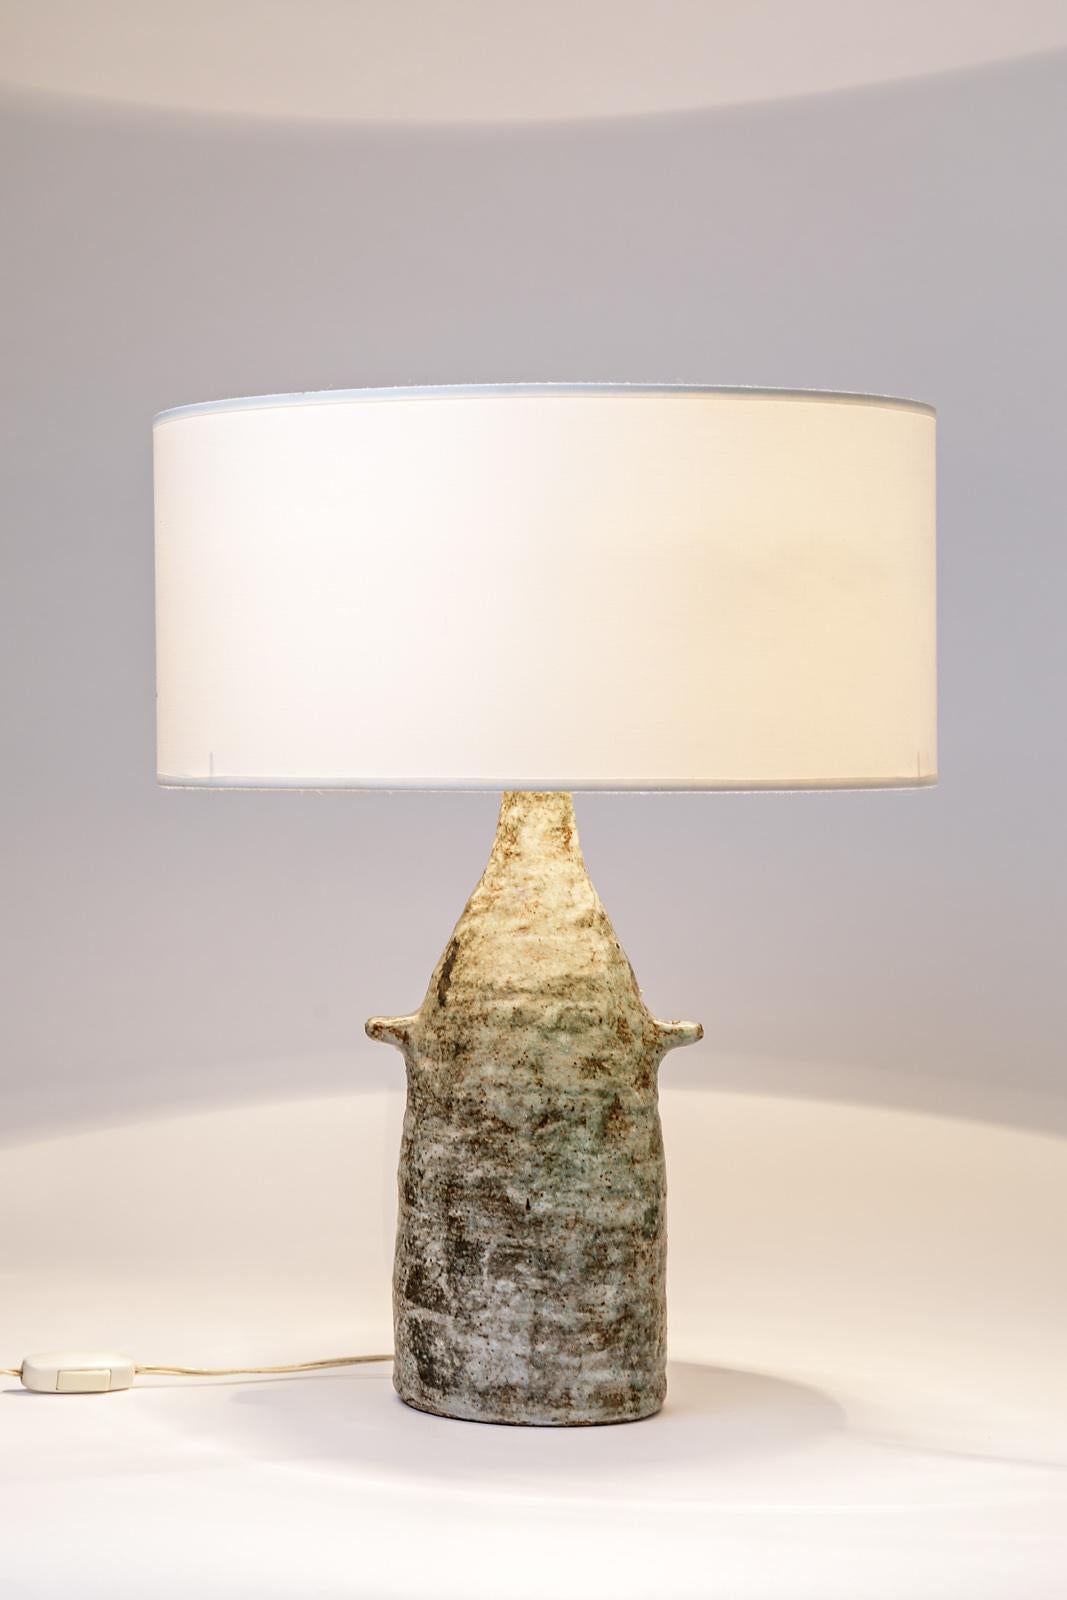 Jean-Pierre Viot 

Midcentury ceramic table lamp.

Original perfect conditions. 

Elegant modern form and grey color. Signed under the base.

Year: 1967

Sold without lampshade.

Ceramic dimensions: 34 x 20 x 12cm
with lampshade: 51 x